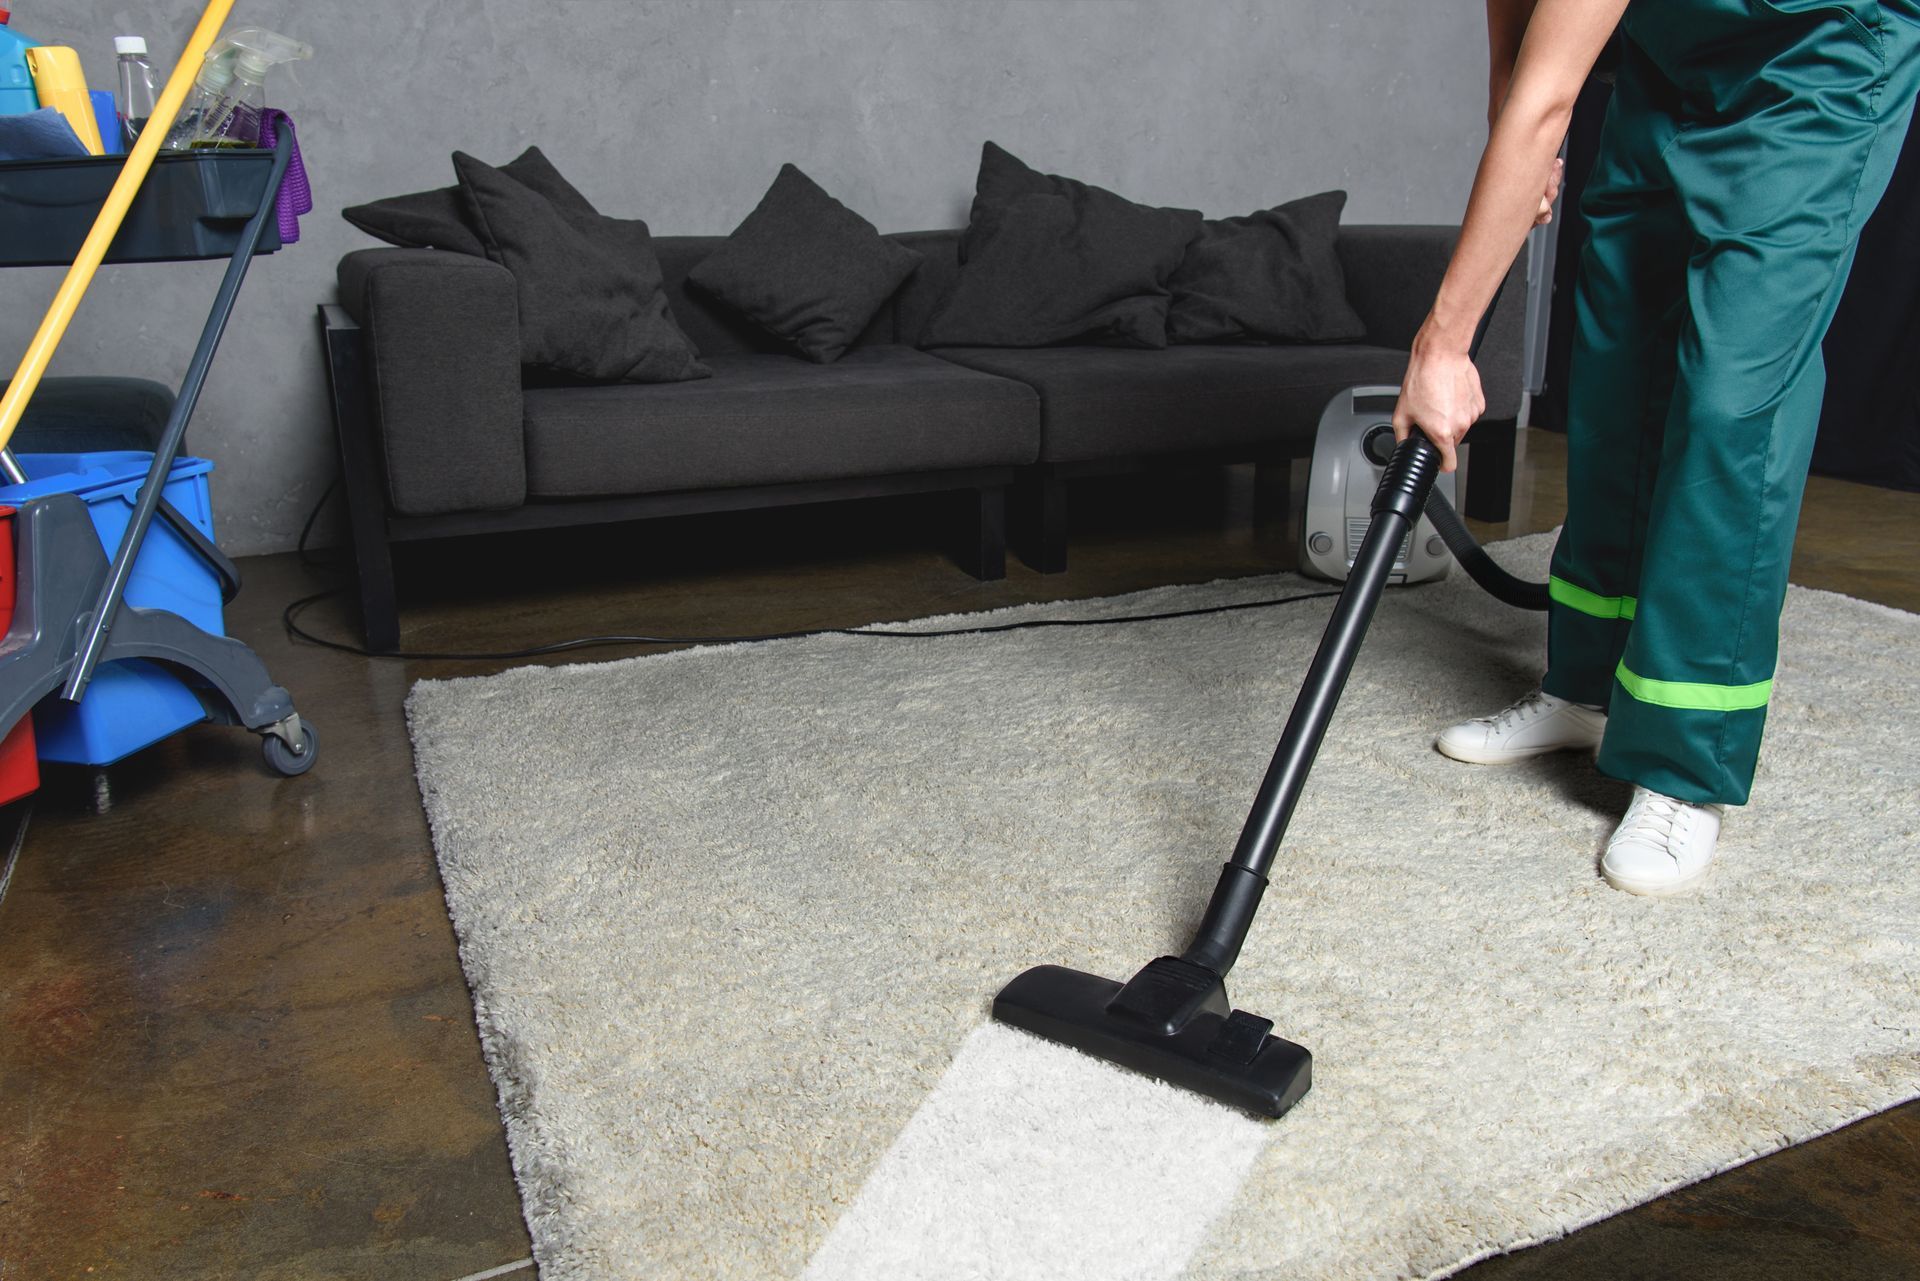 Person using a vacuum cleaner to clean a white carpet, diligently removing dust and debris.